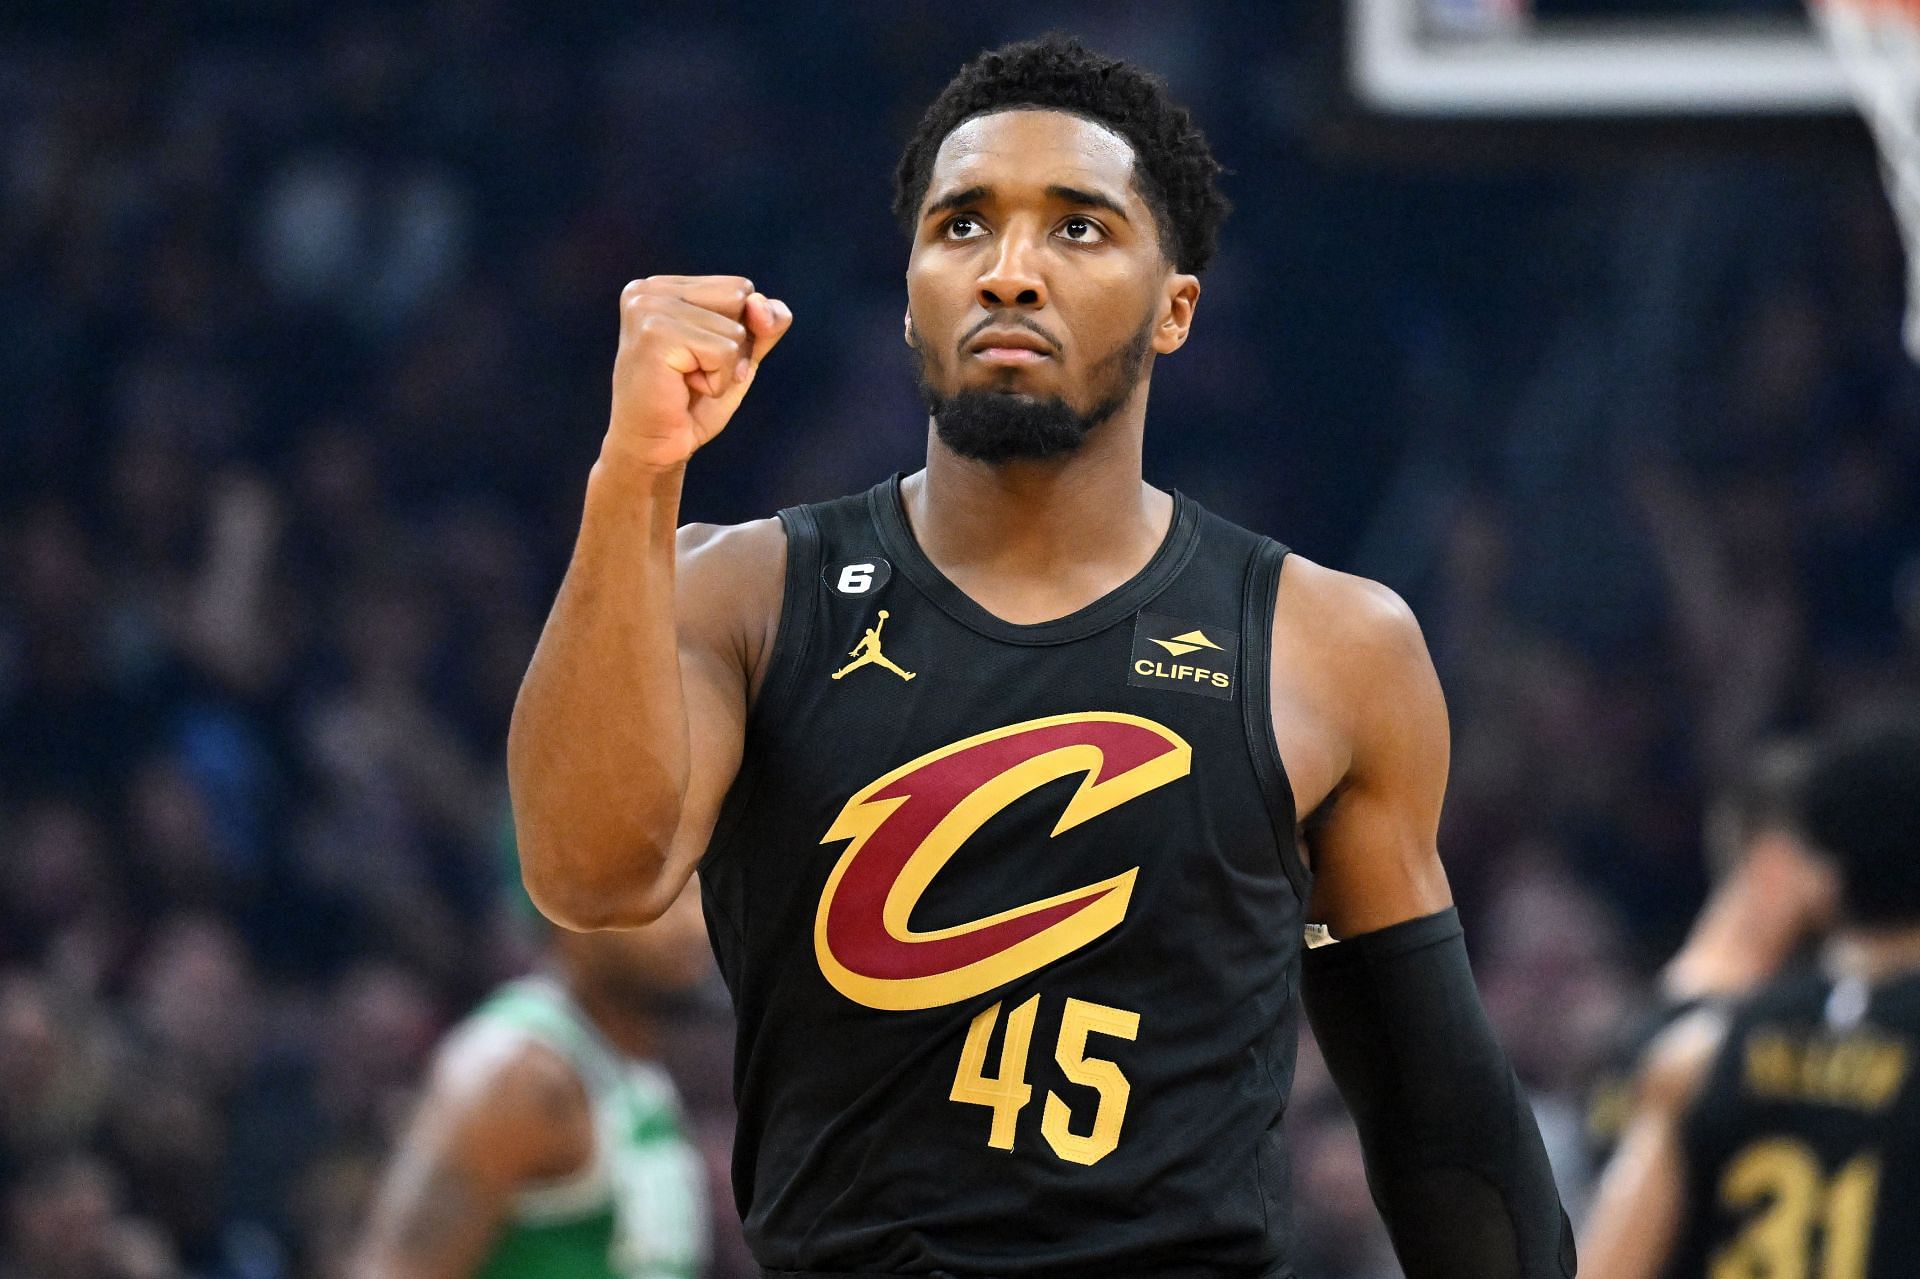 Cleveland Cavaliers All-Star guard Donovan Mitchell has been on a tear to start the 2022-23 NBA season